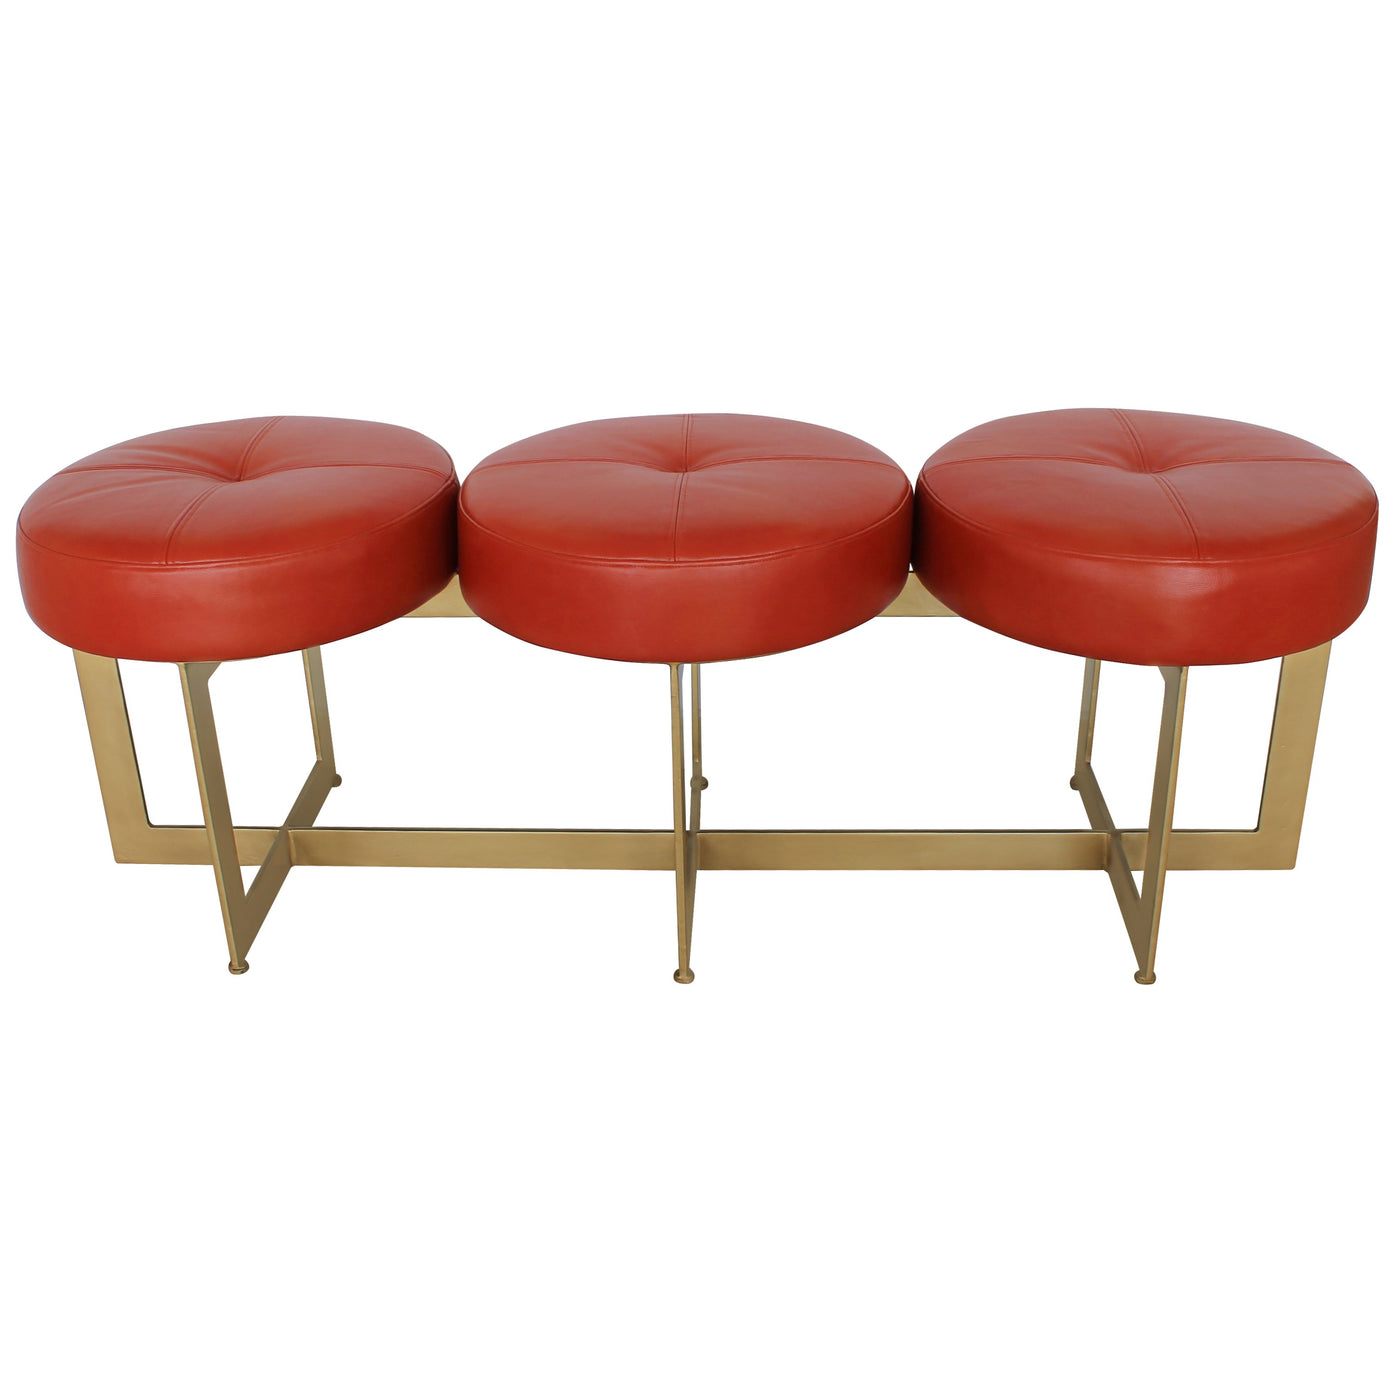 Modern bench with a metal gold base topped with three cushions upholstered in red leather